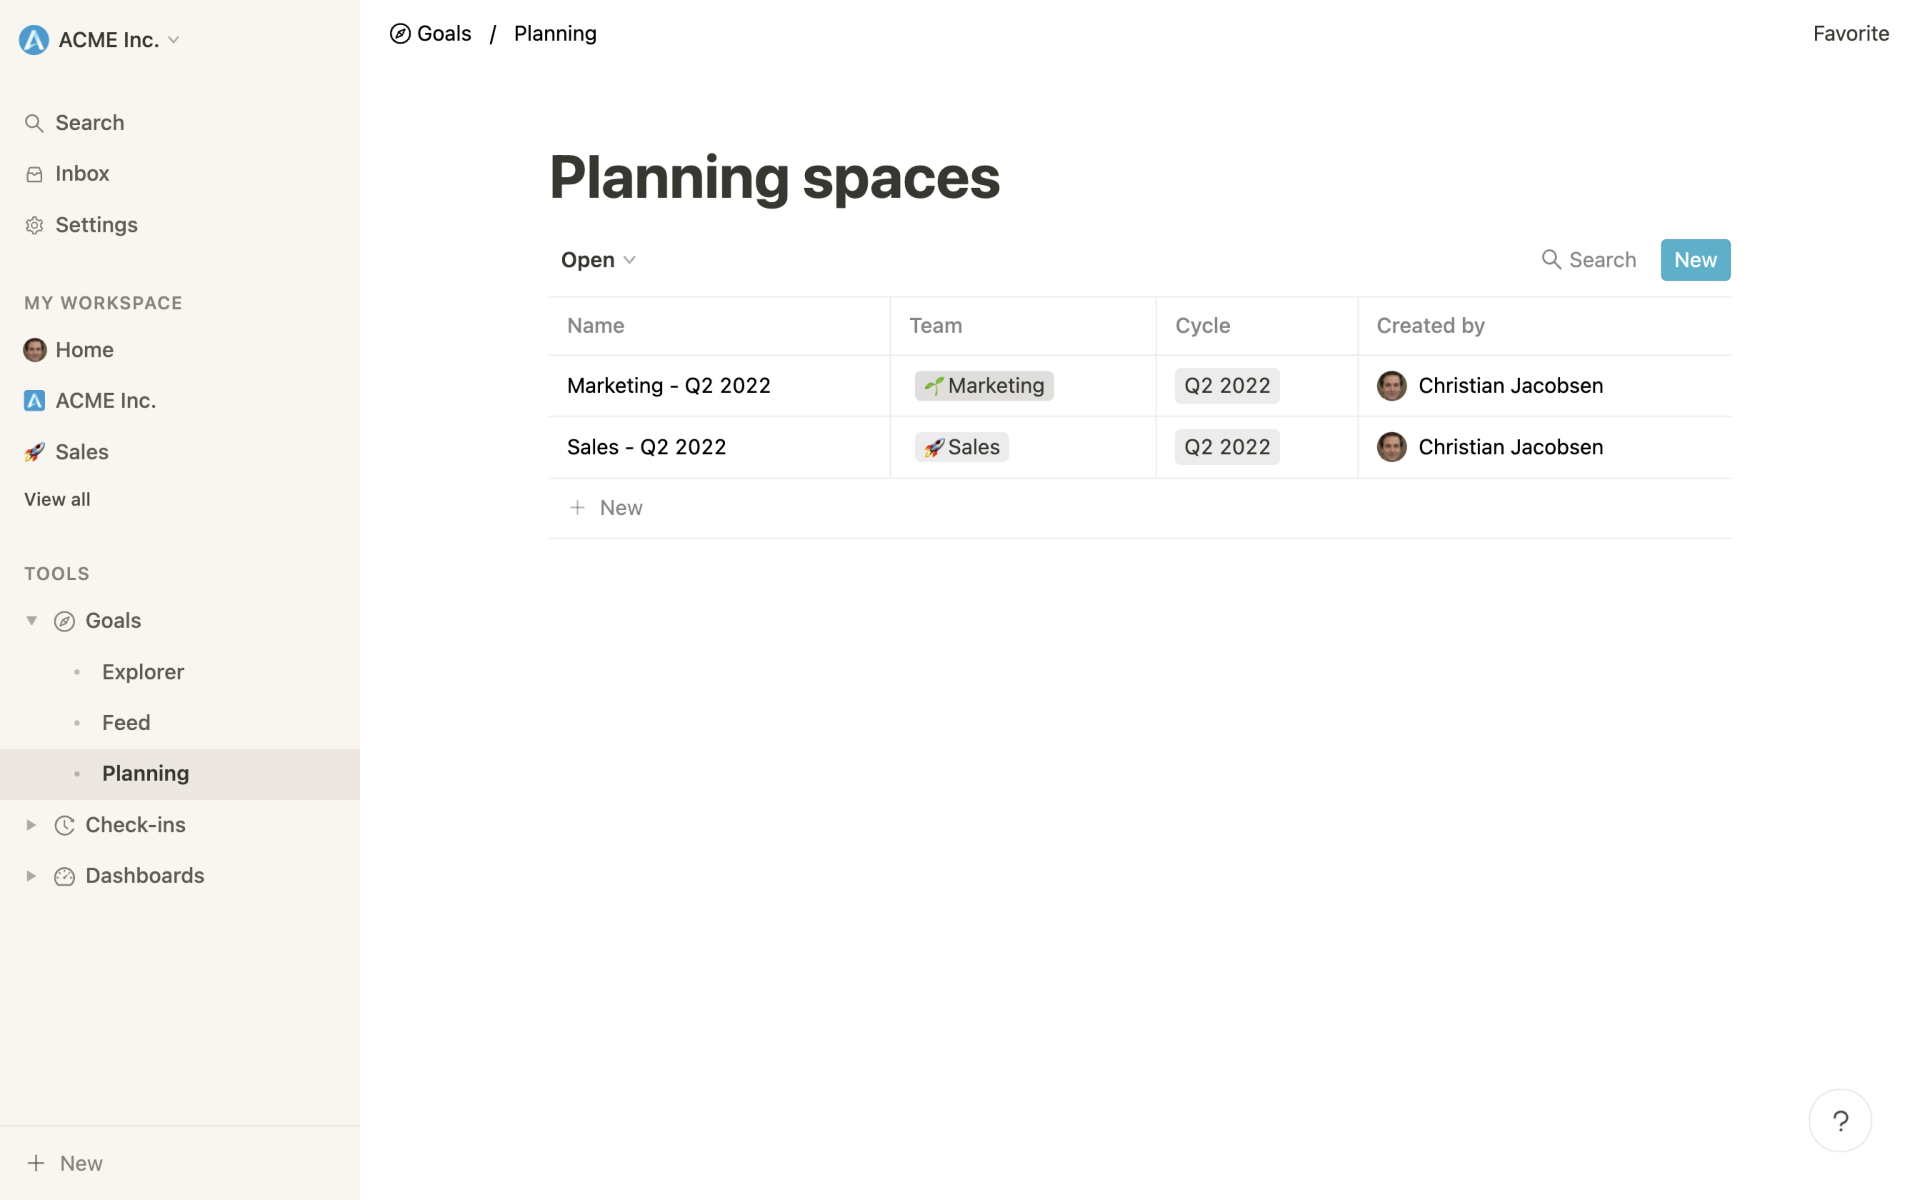 OKR Planning Spaces